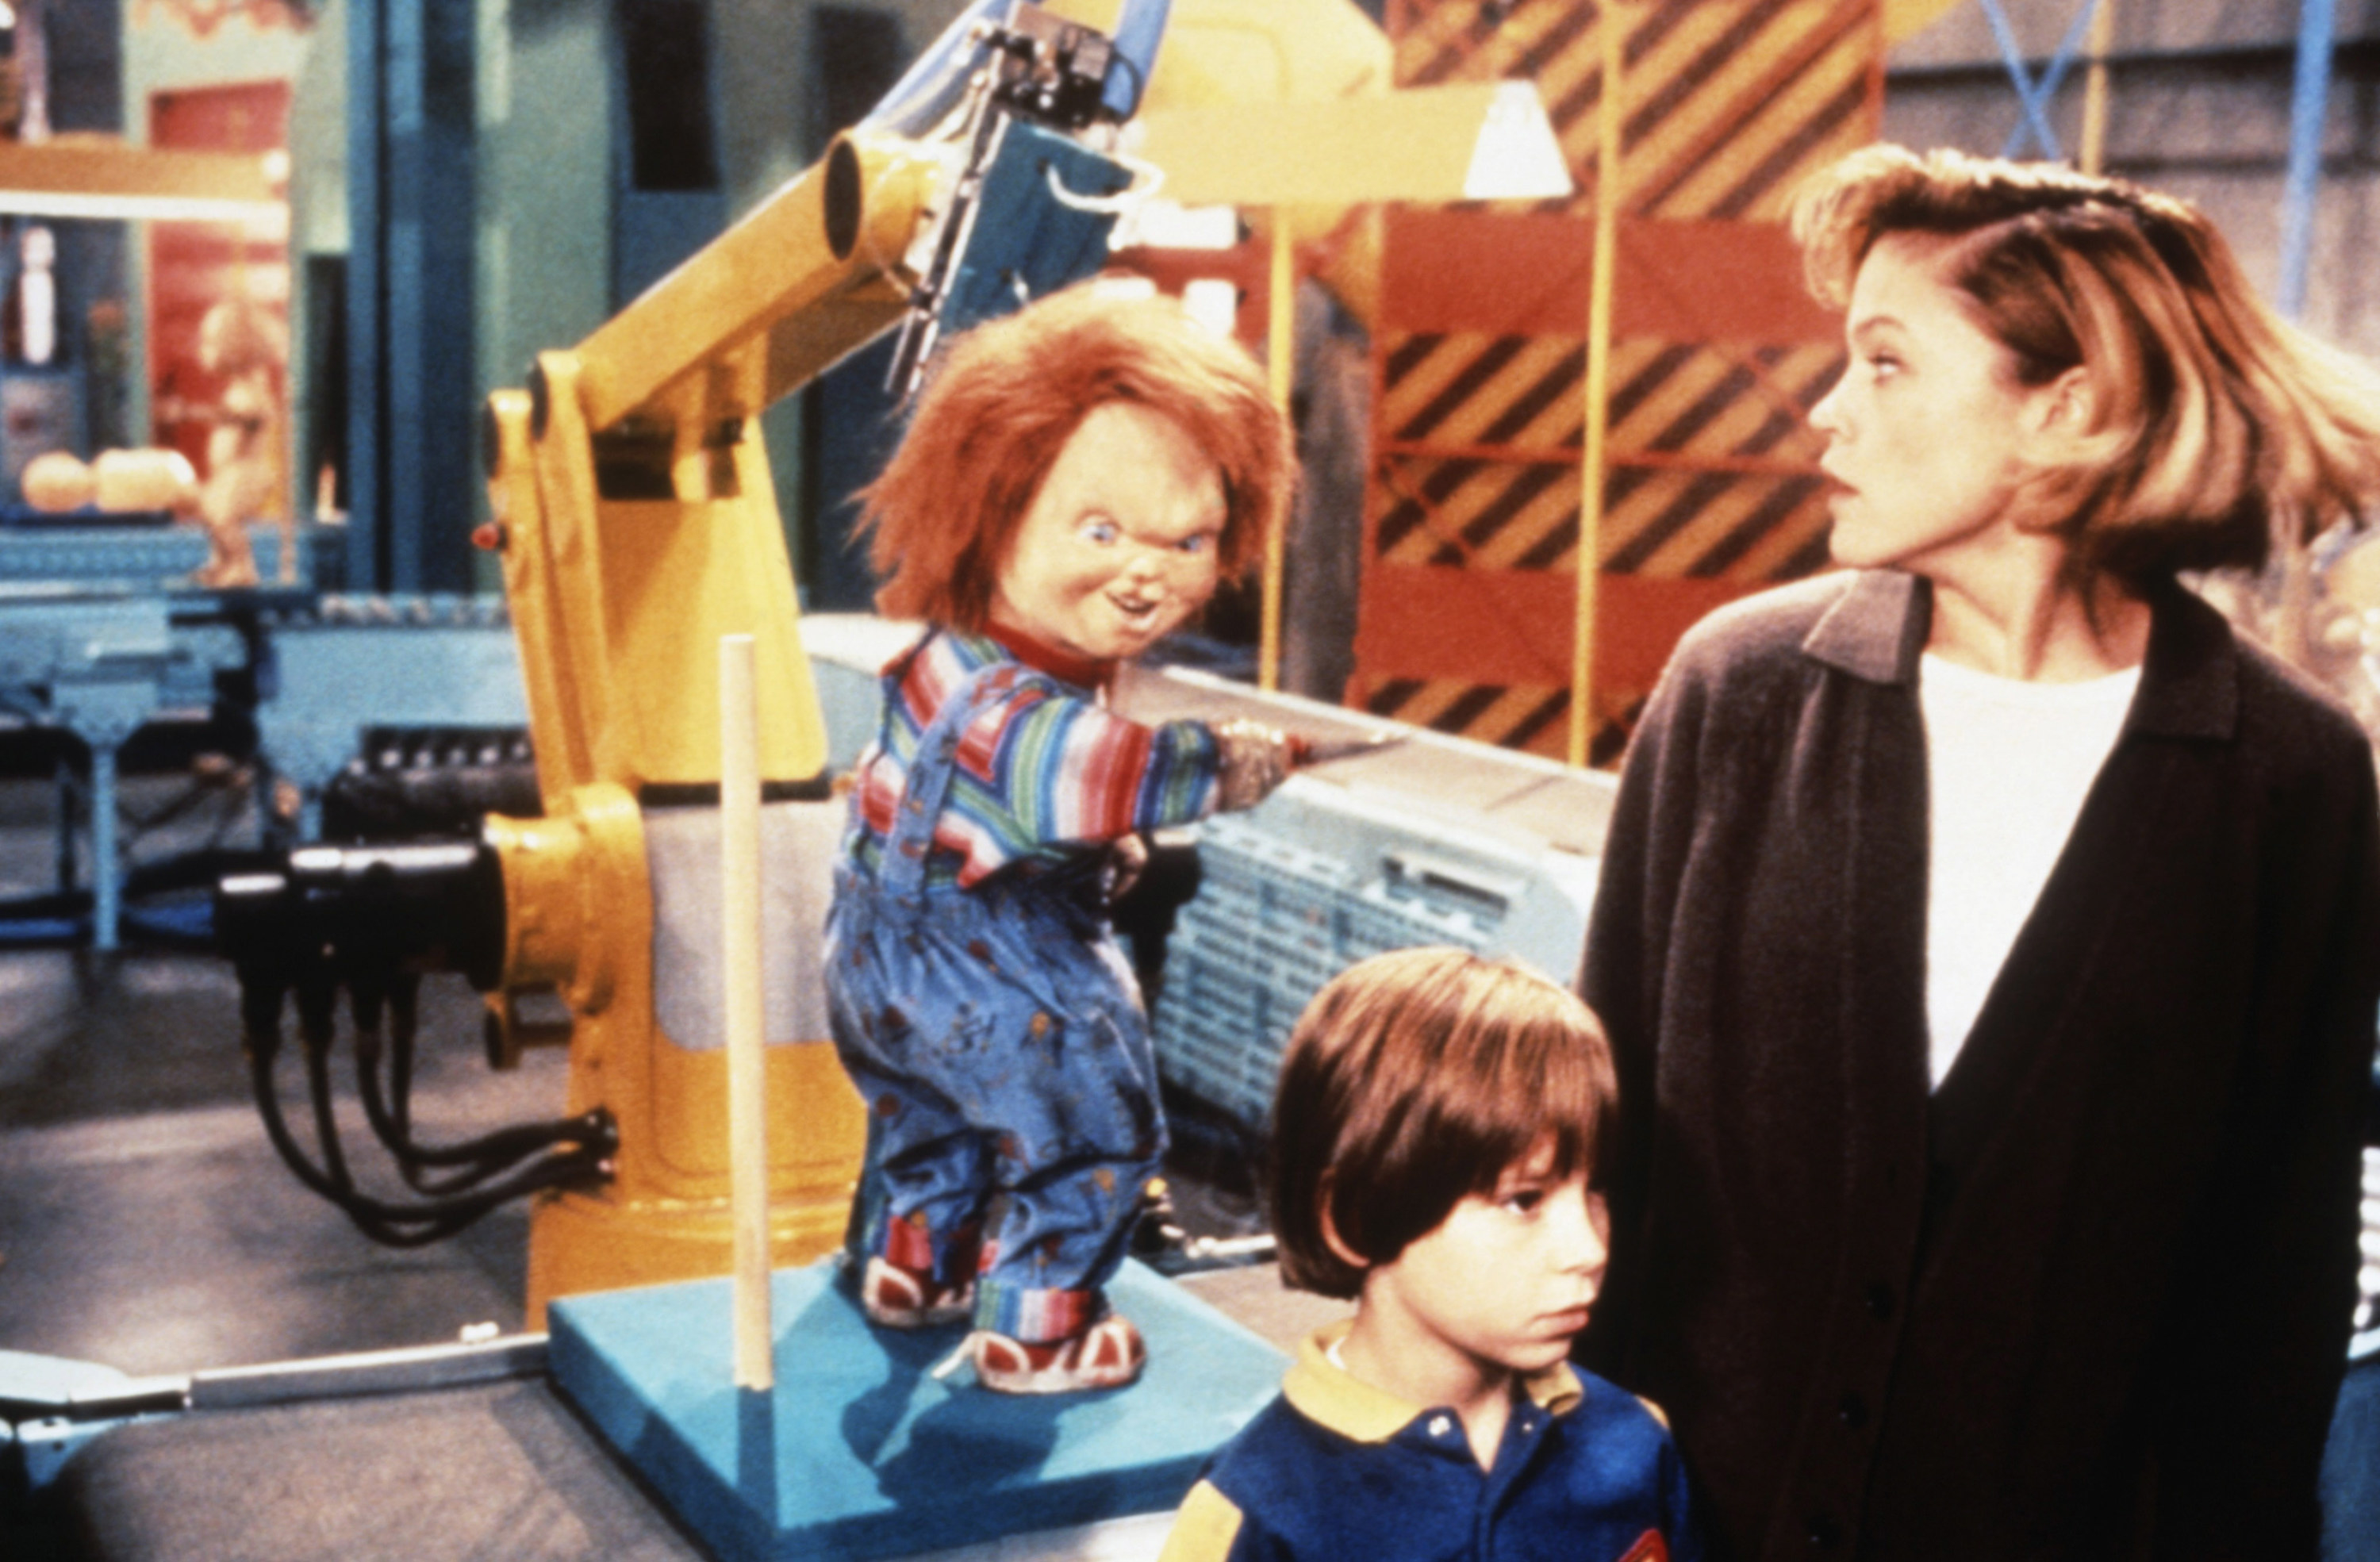 A behind-the-scenes look of Chucky being controlled with robotics